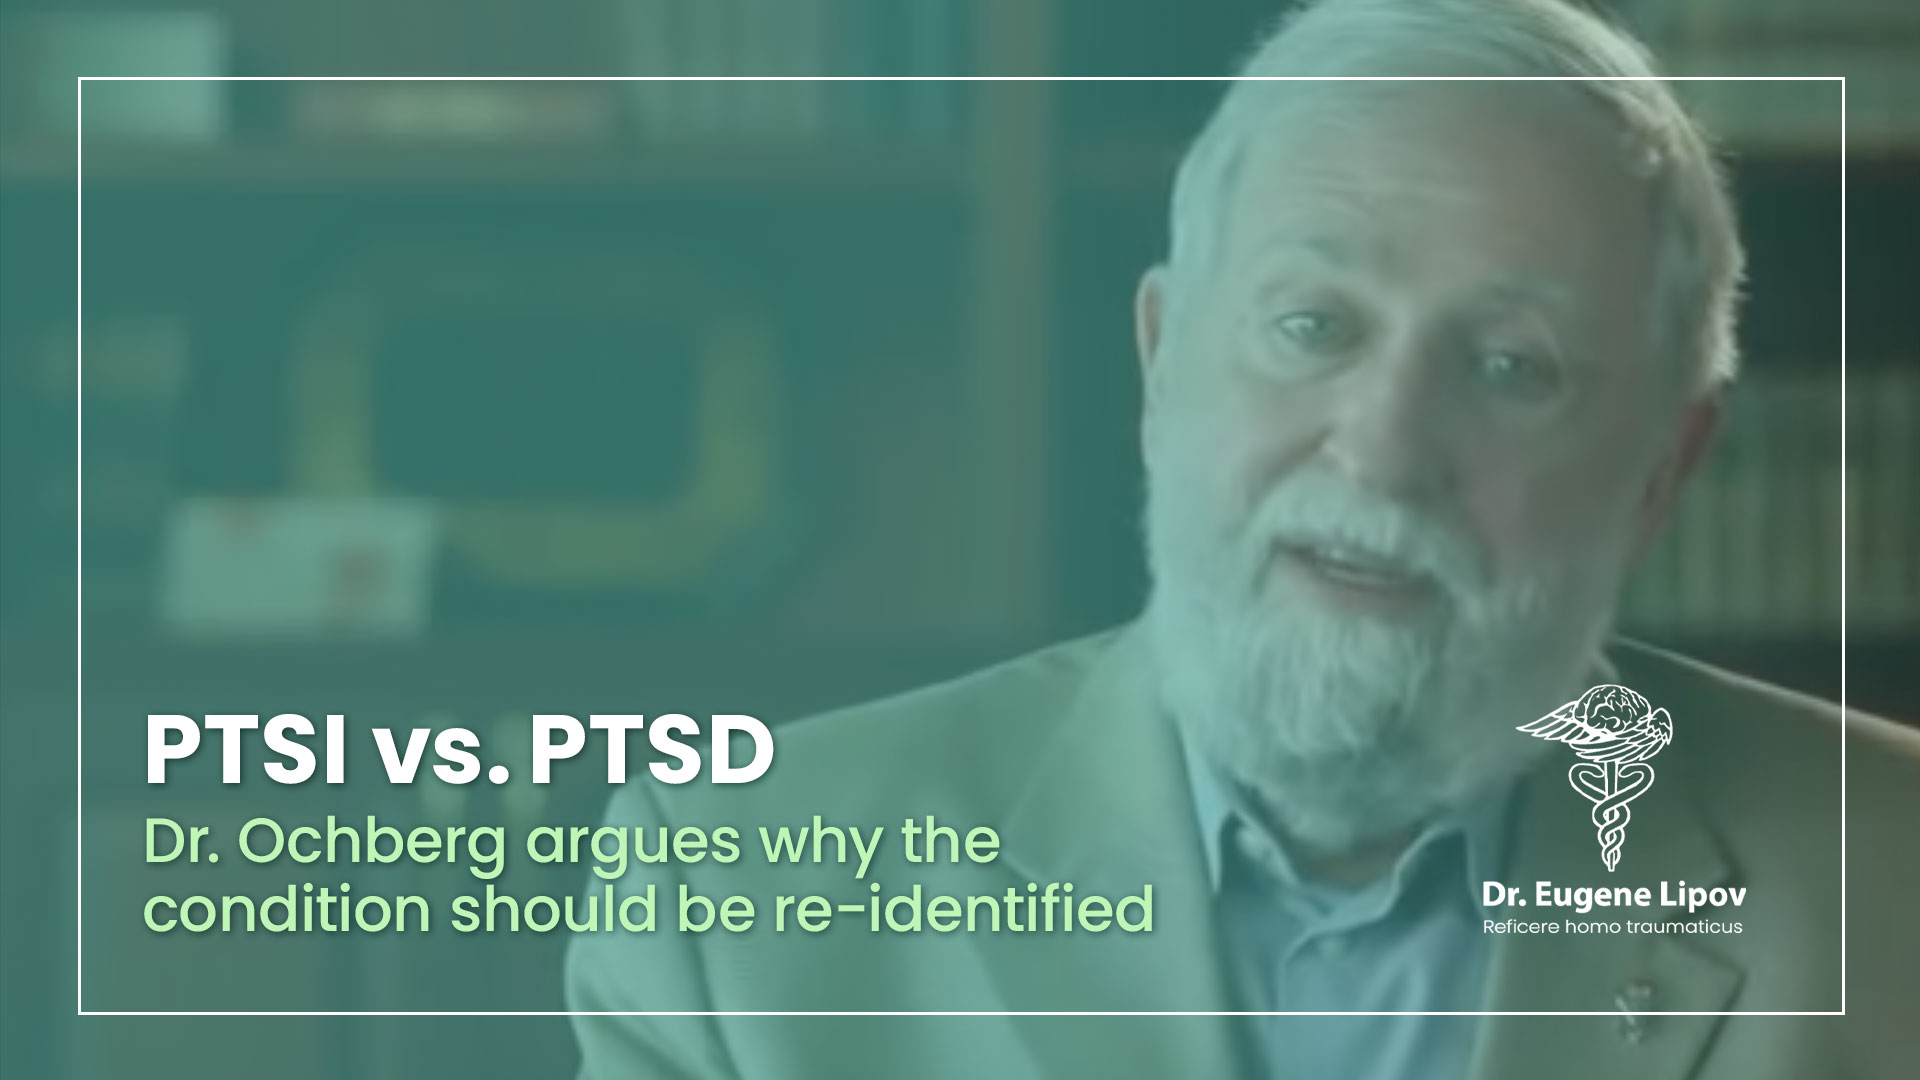 VIDEO THUMBNAIL: One of founding fathers of modern psychotraumatology who and served on the committee that originally defined PTSD makes argument for “PTSI.”